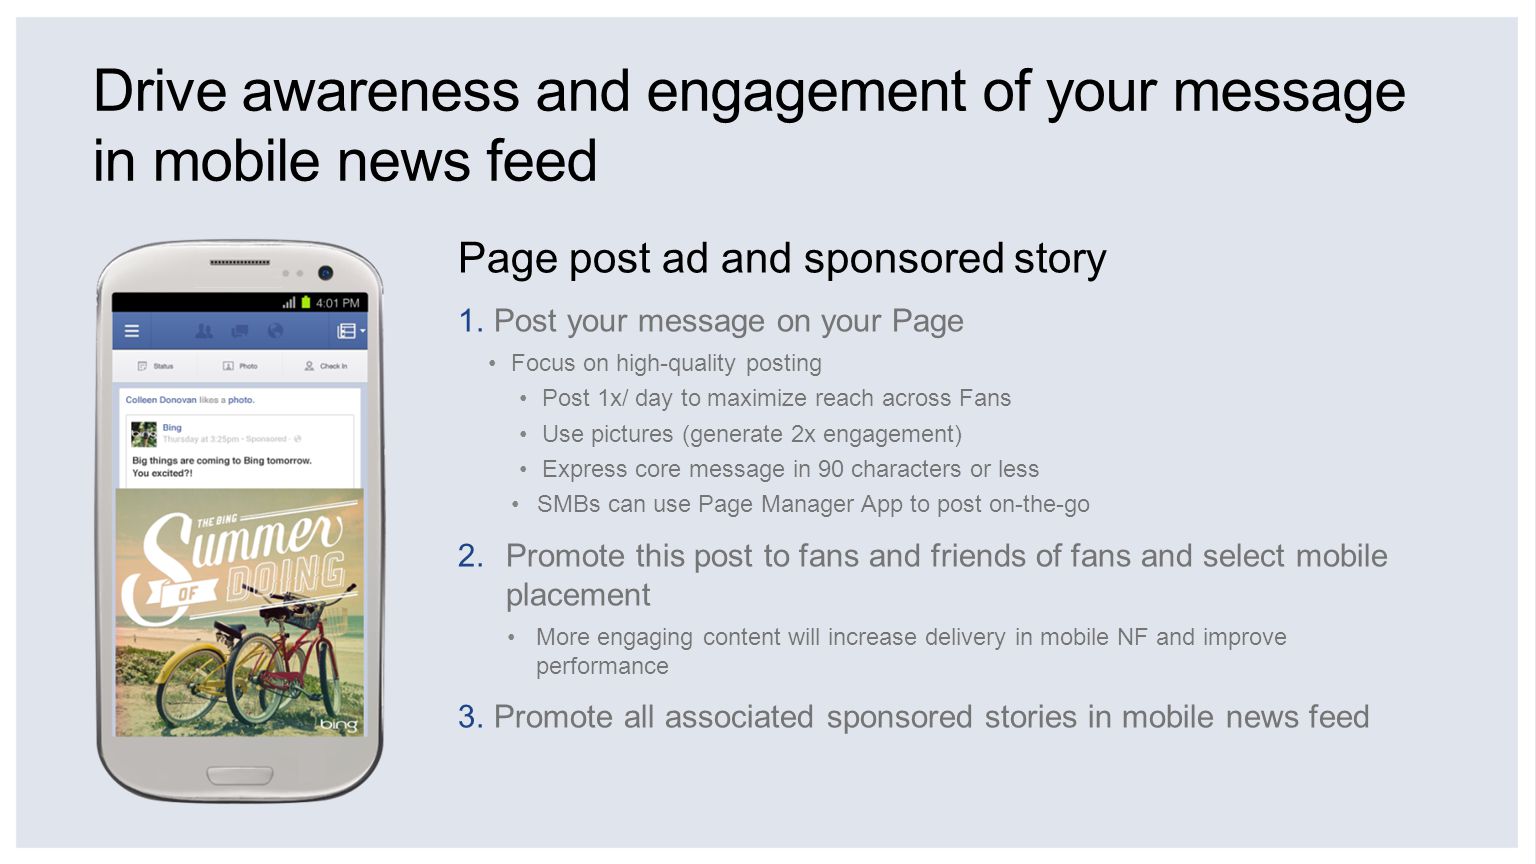 Drive awareness and engagement of your message in mobile news feed Page post ad and sponsored story 1.Post your message on your Page Focus on high-quality posting Post 1x/ day to maximize reach across Fans Use pictures (generate 2x engagement) Express core message in 90 characters or less SMBs can use Page Manager App to post on-the-go 2.Promote this post to fans and friends of fans and select mobile placement More engaging content will increase delivery in mobile NF and improve performance 3.Promote all associated sponsored stories in mobile news feed